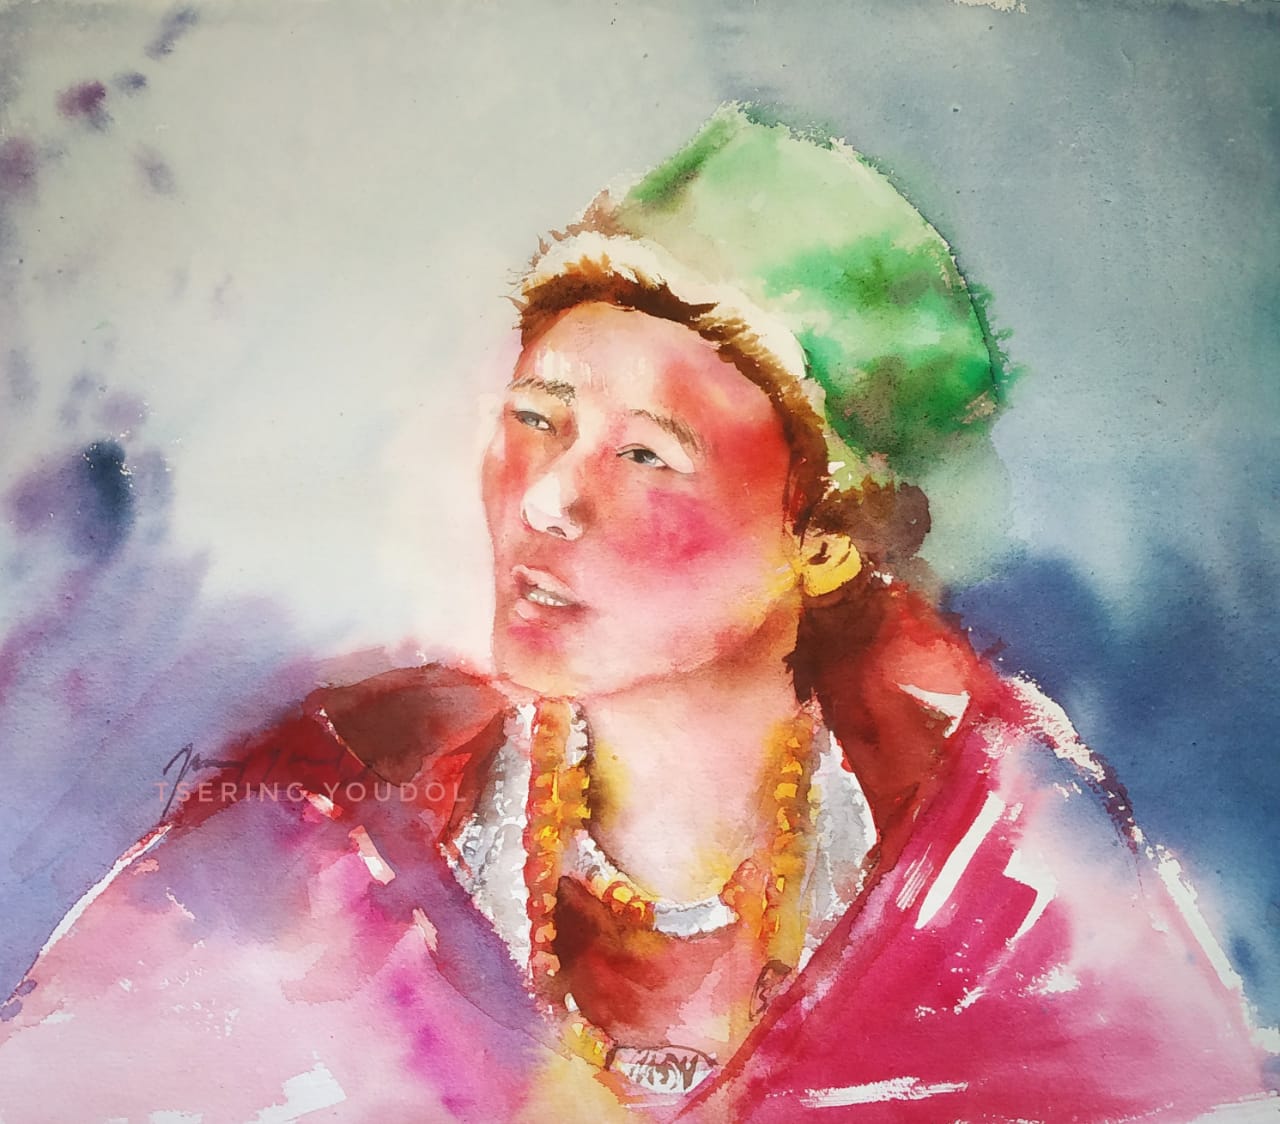 Figurative Painting with Watercolor on Paper "Spiti Woman" art by Tsering Youdol